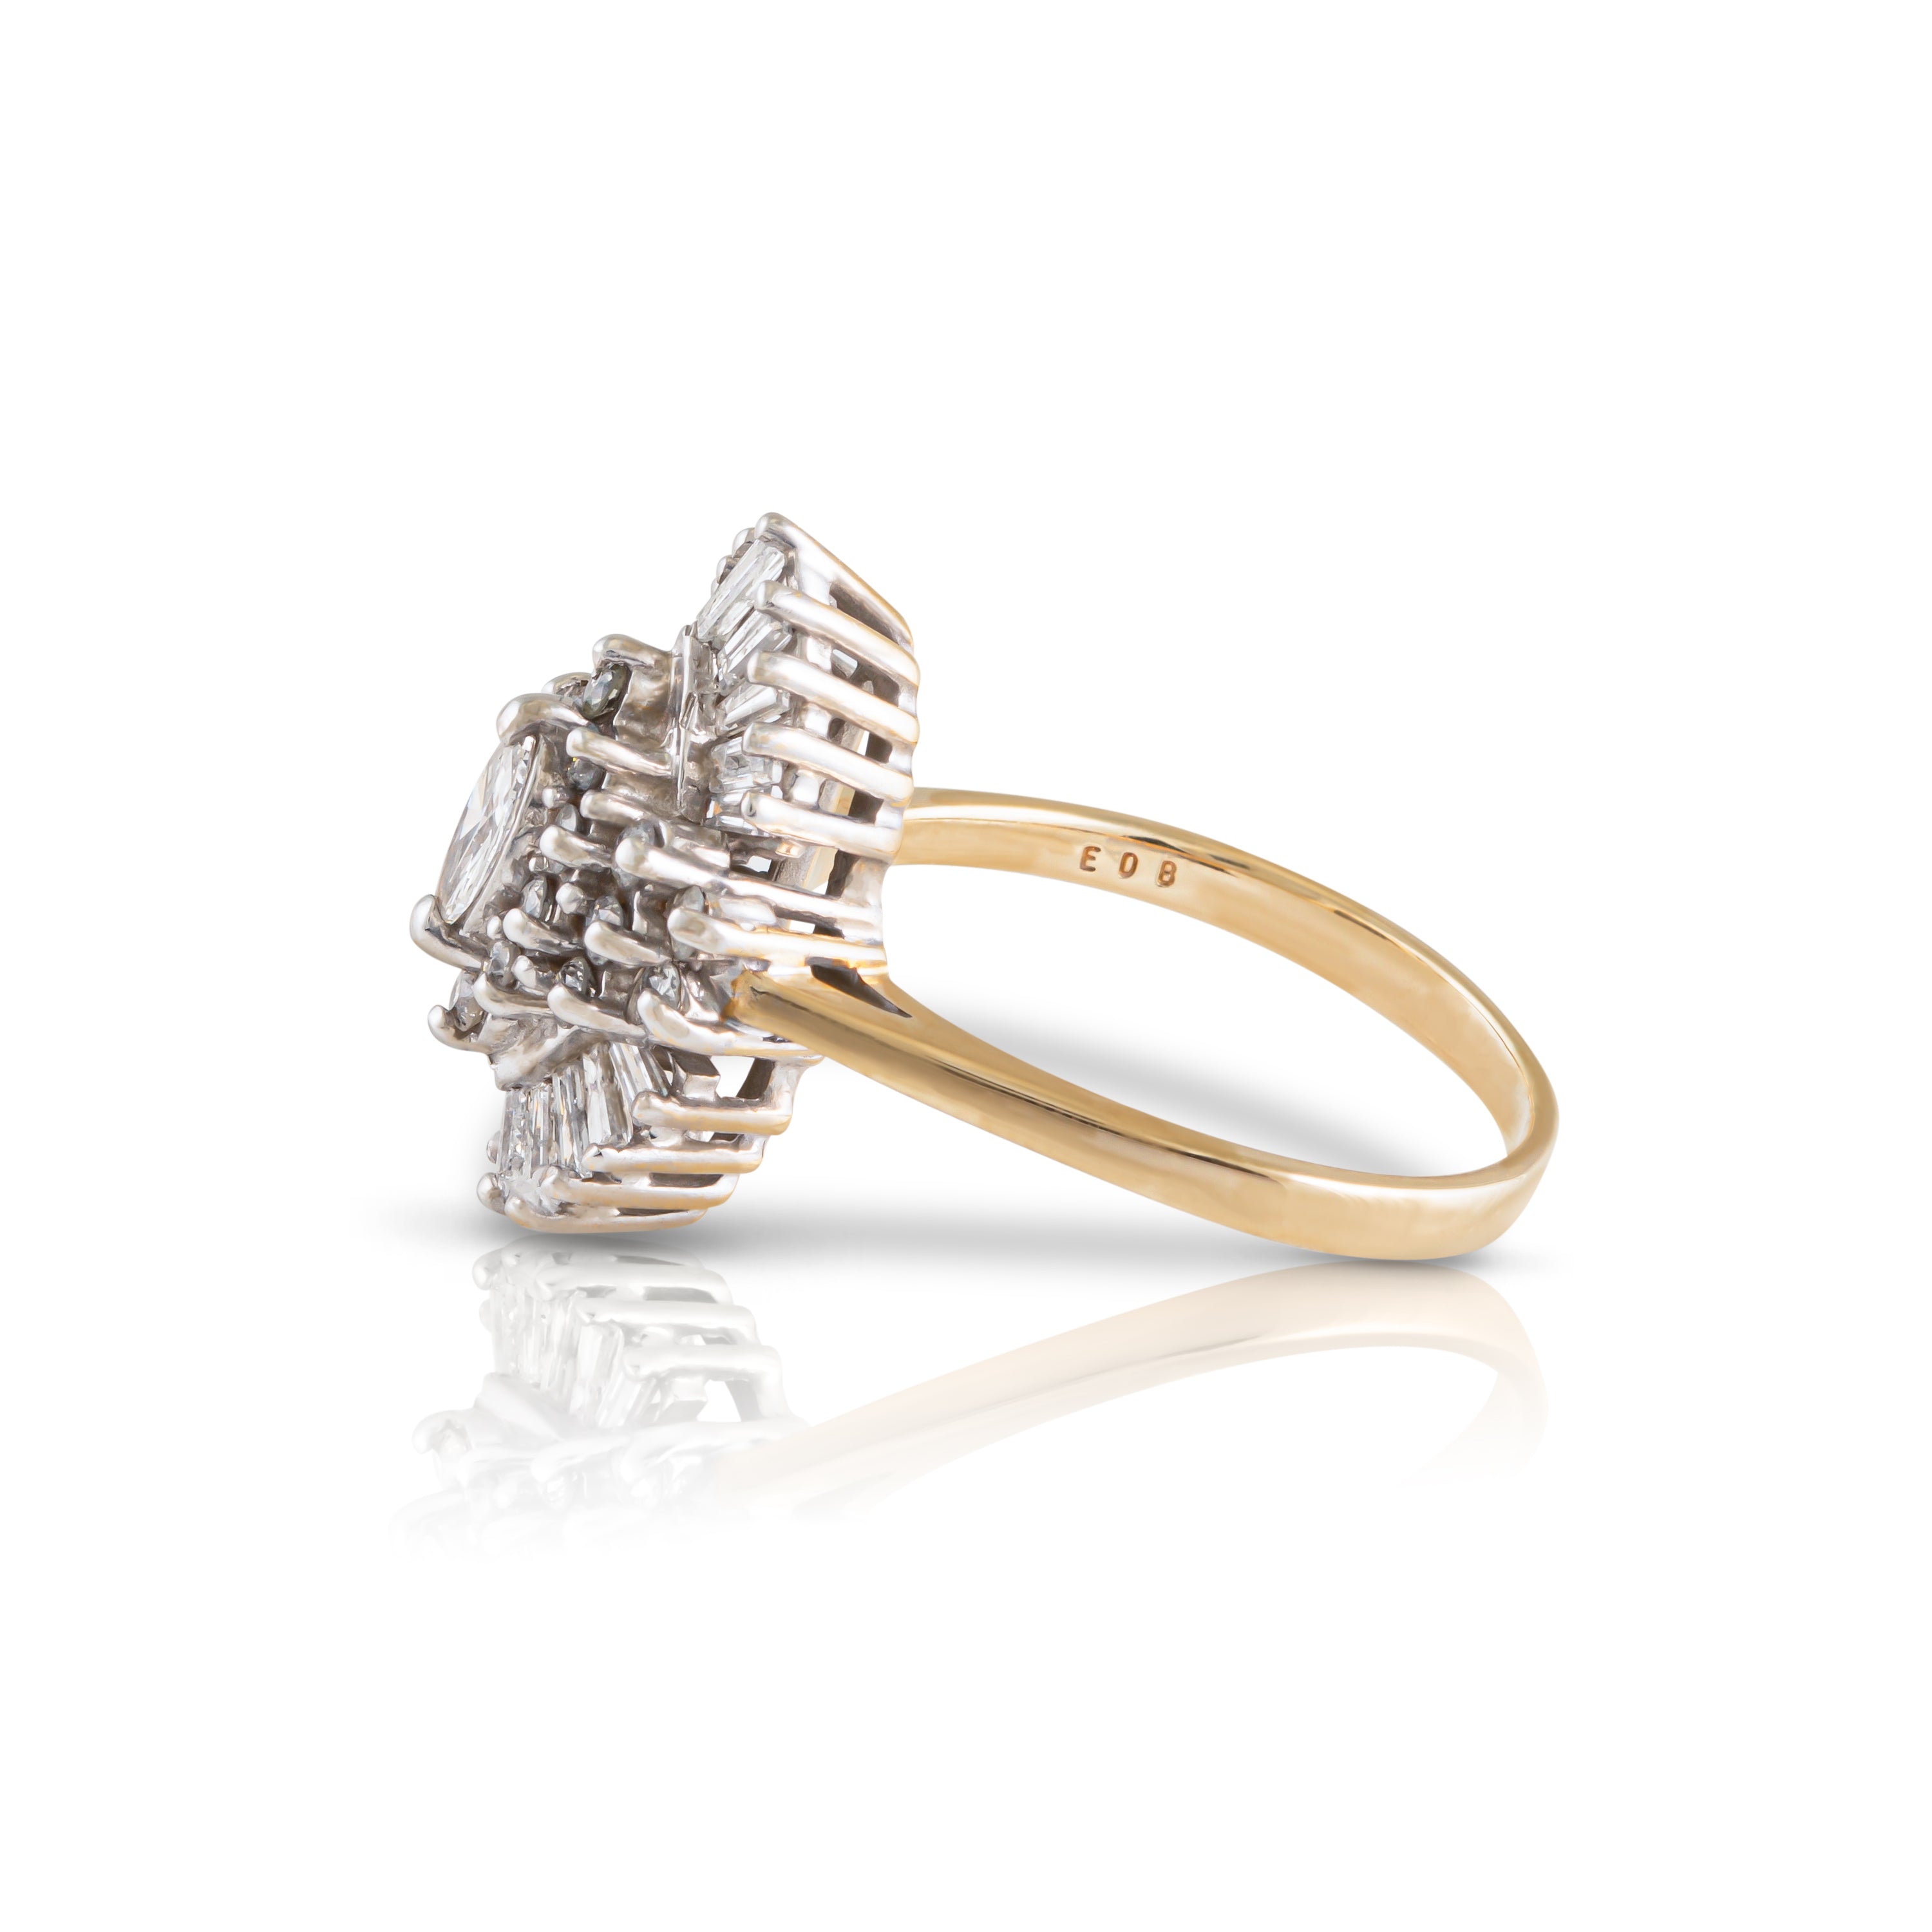 Modern Marquise Center Diamond cocktail ring